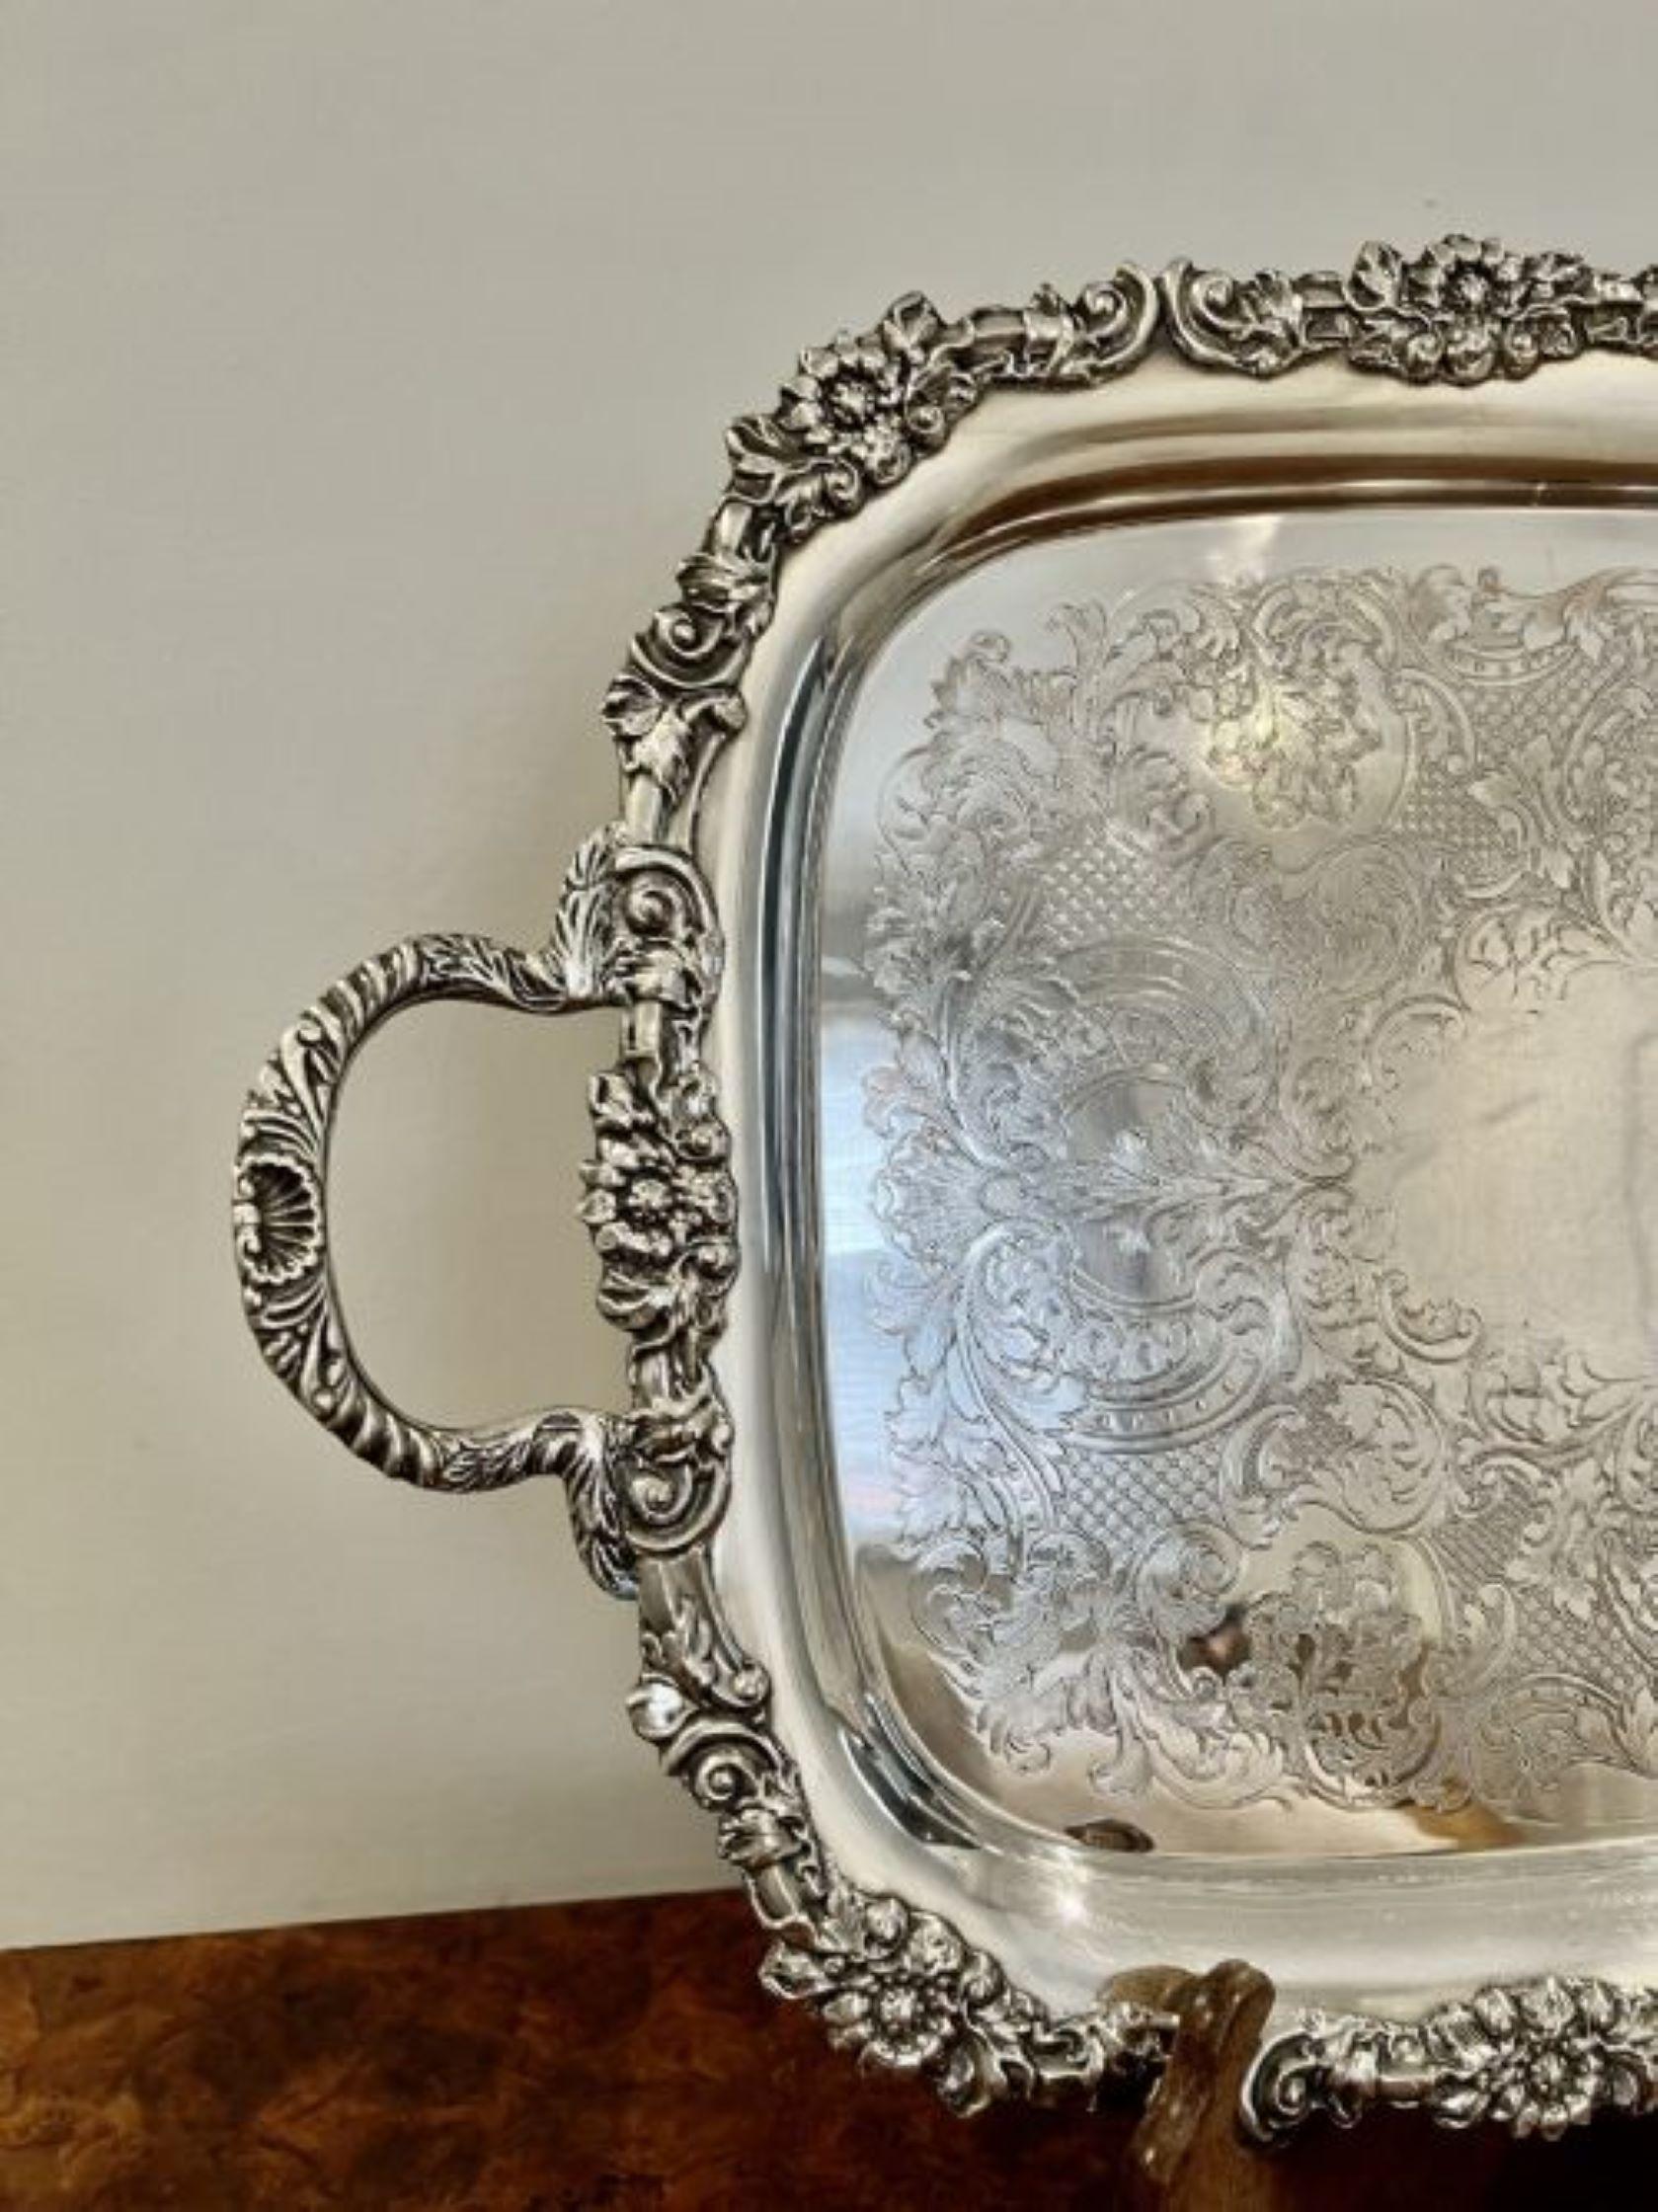 Fantastic quality antique Victorian silver plated ornate serving tray having a quality large serving tray with quality ornate decoration with flowers, leaves and scrolls and two ornate carrying handles to both sides raised on four feet
